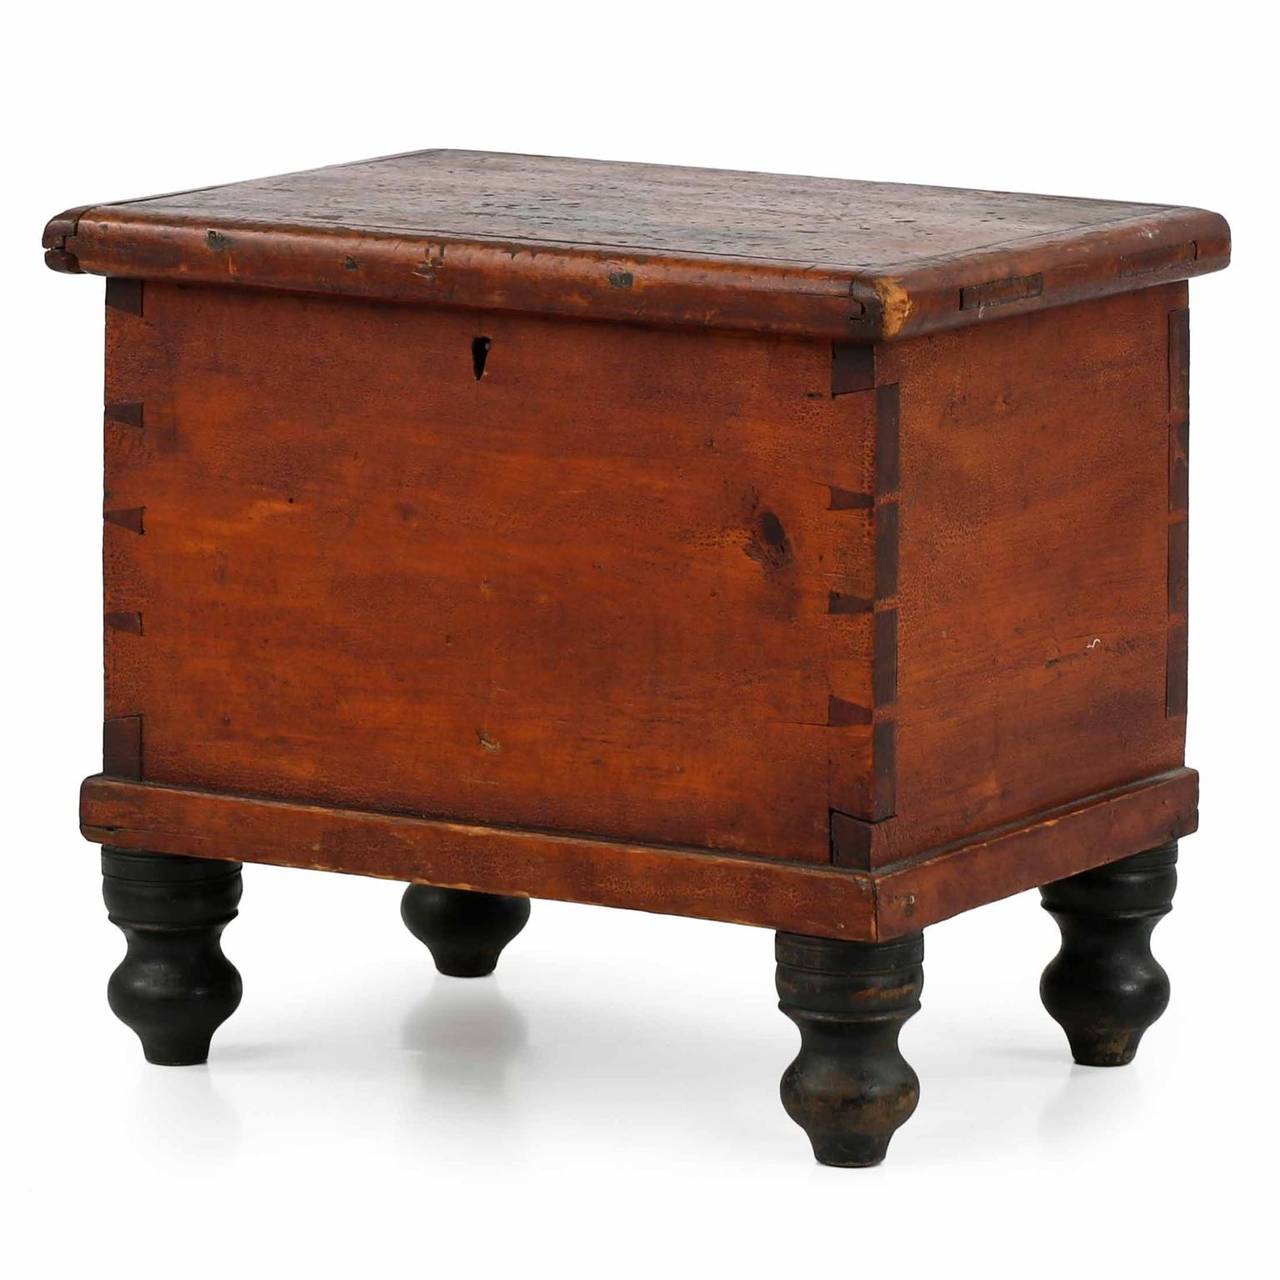 A rare and precious find, this very fine American miniature blanket chest is preserved in entirely original condition with an untouched surface and structure, retaining all original hardware and feet.  The red painted surface is dry and absolutely